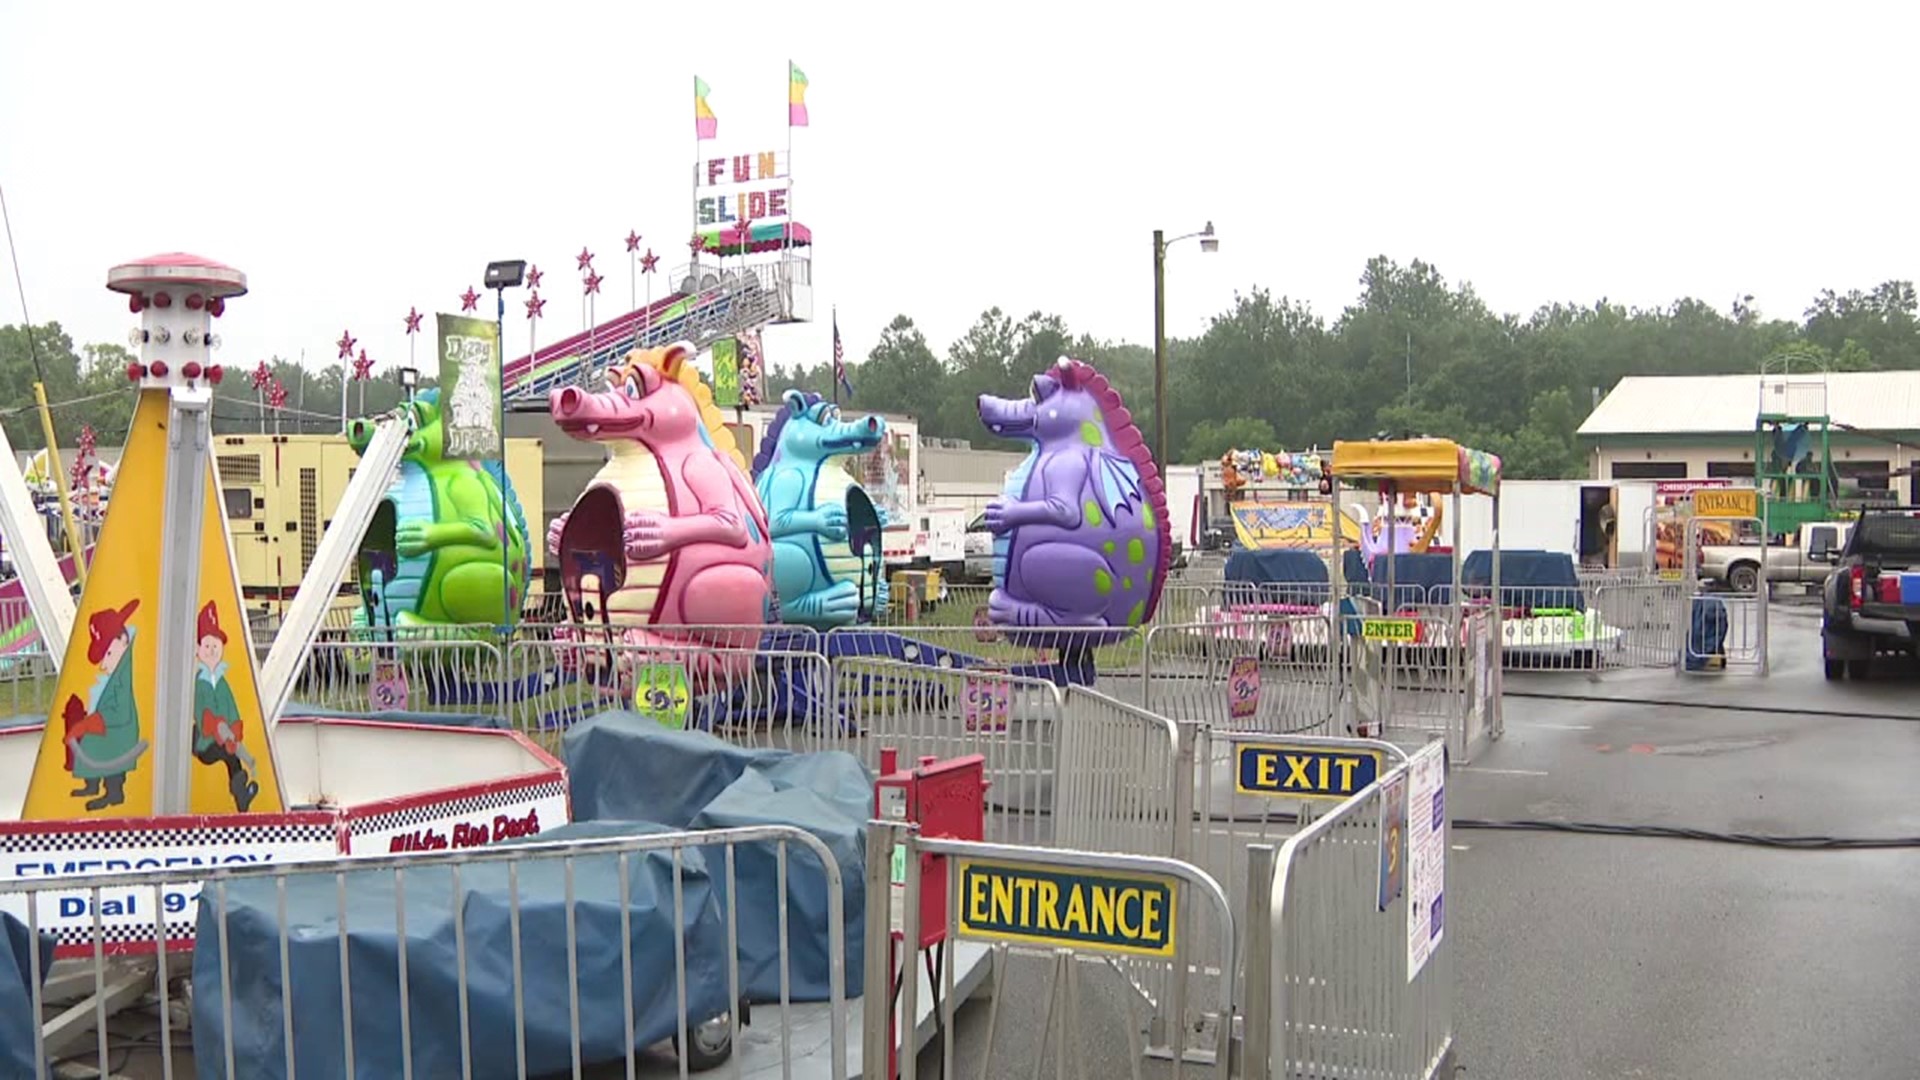 Money raised from the carnival will help the fire department purchase better equipment.